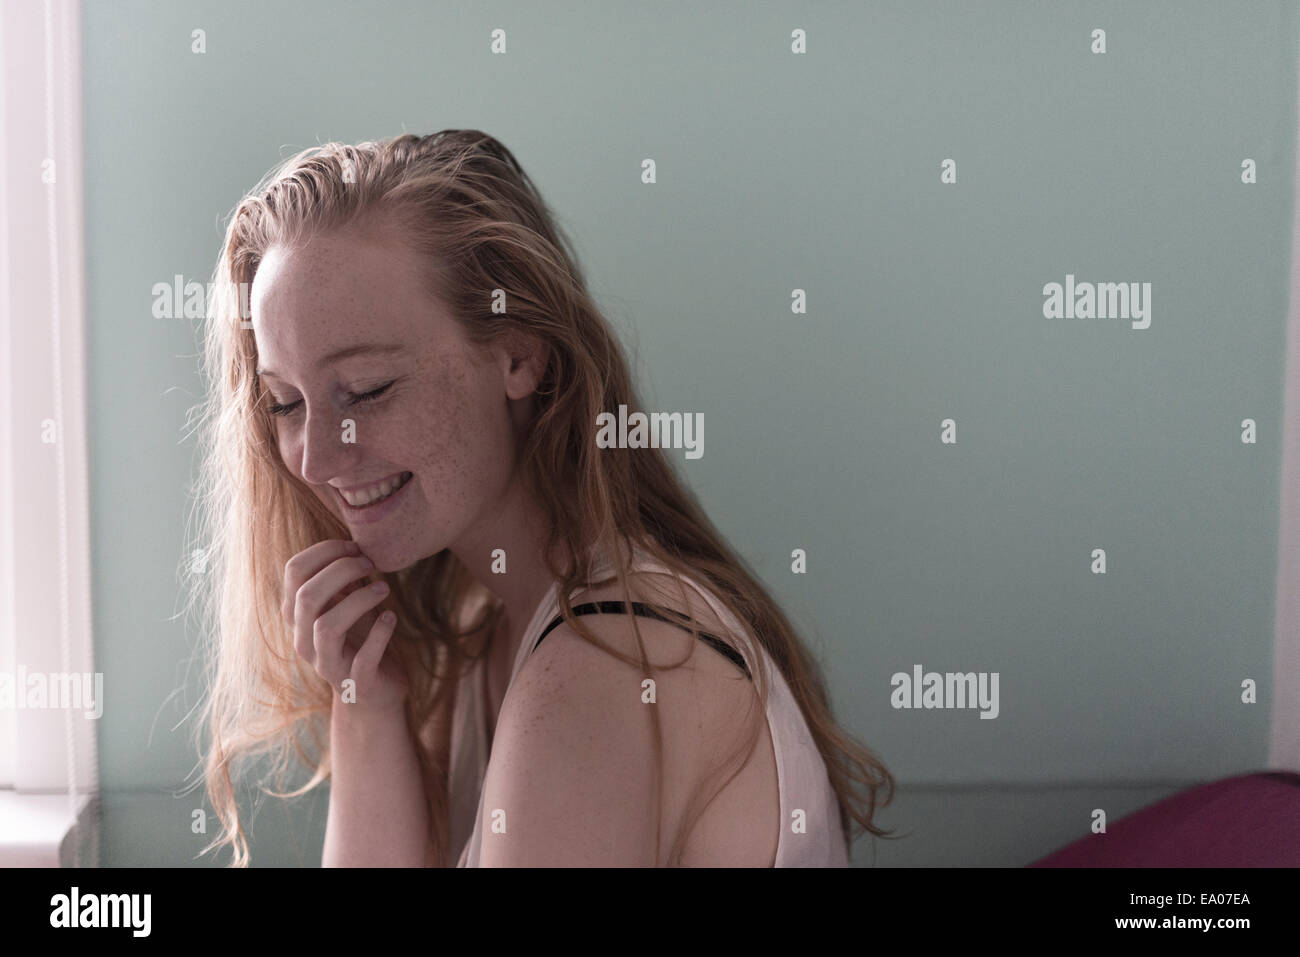 Portrait of young woman with freckles laughing Stock Photo